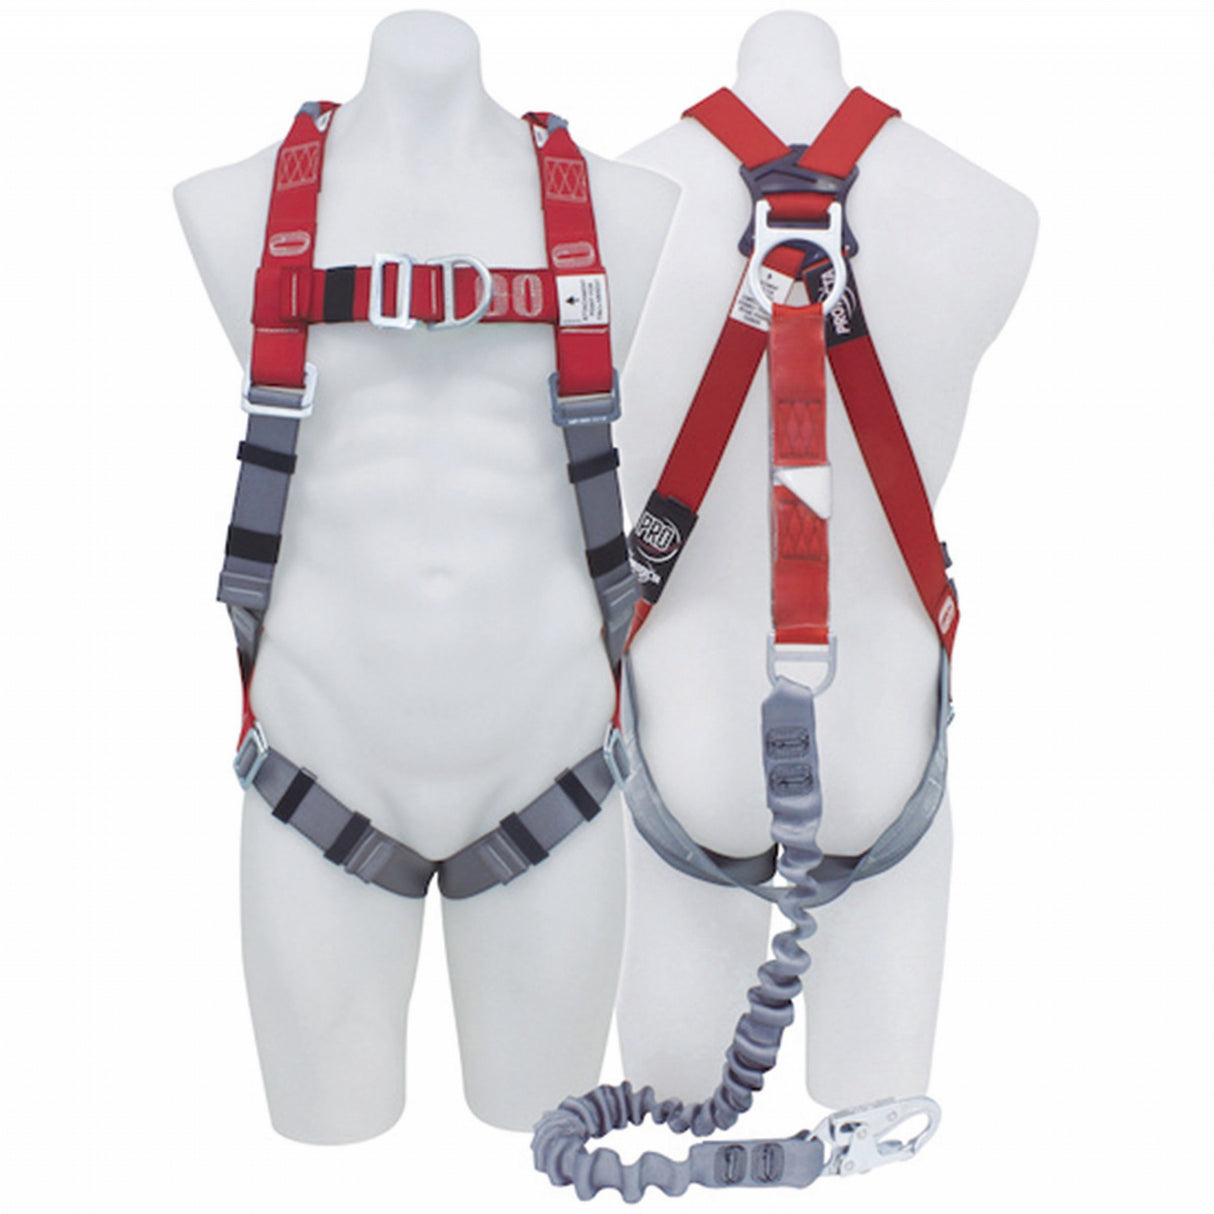 Protecta PRO Riggers Harness with Elasticated Integral Lanyard & Snap Hook